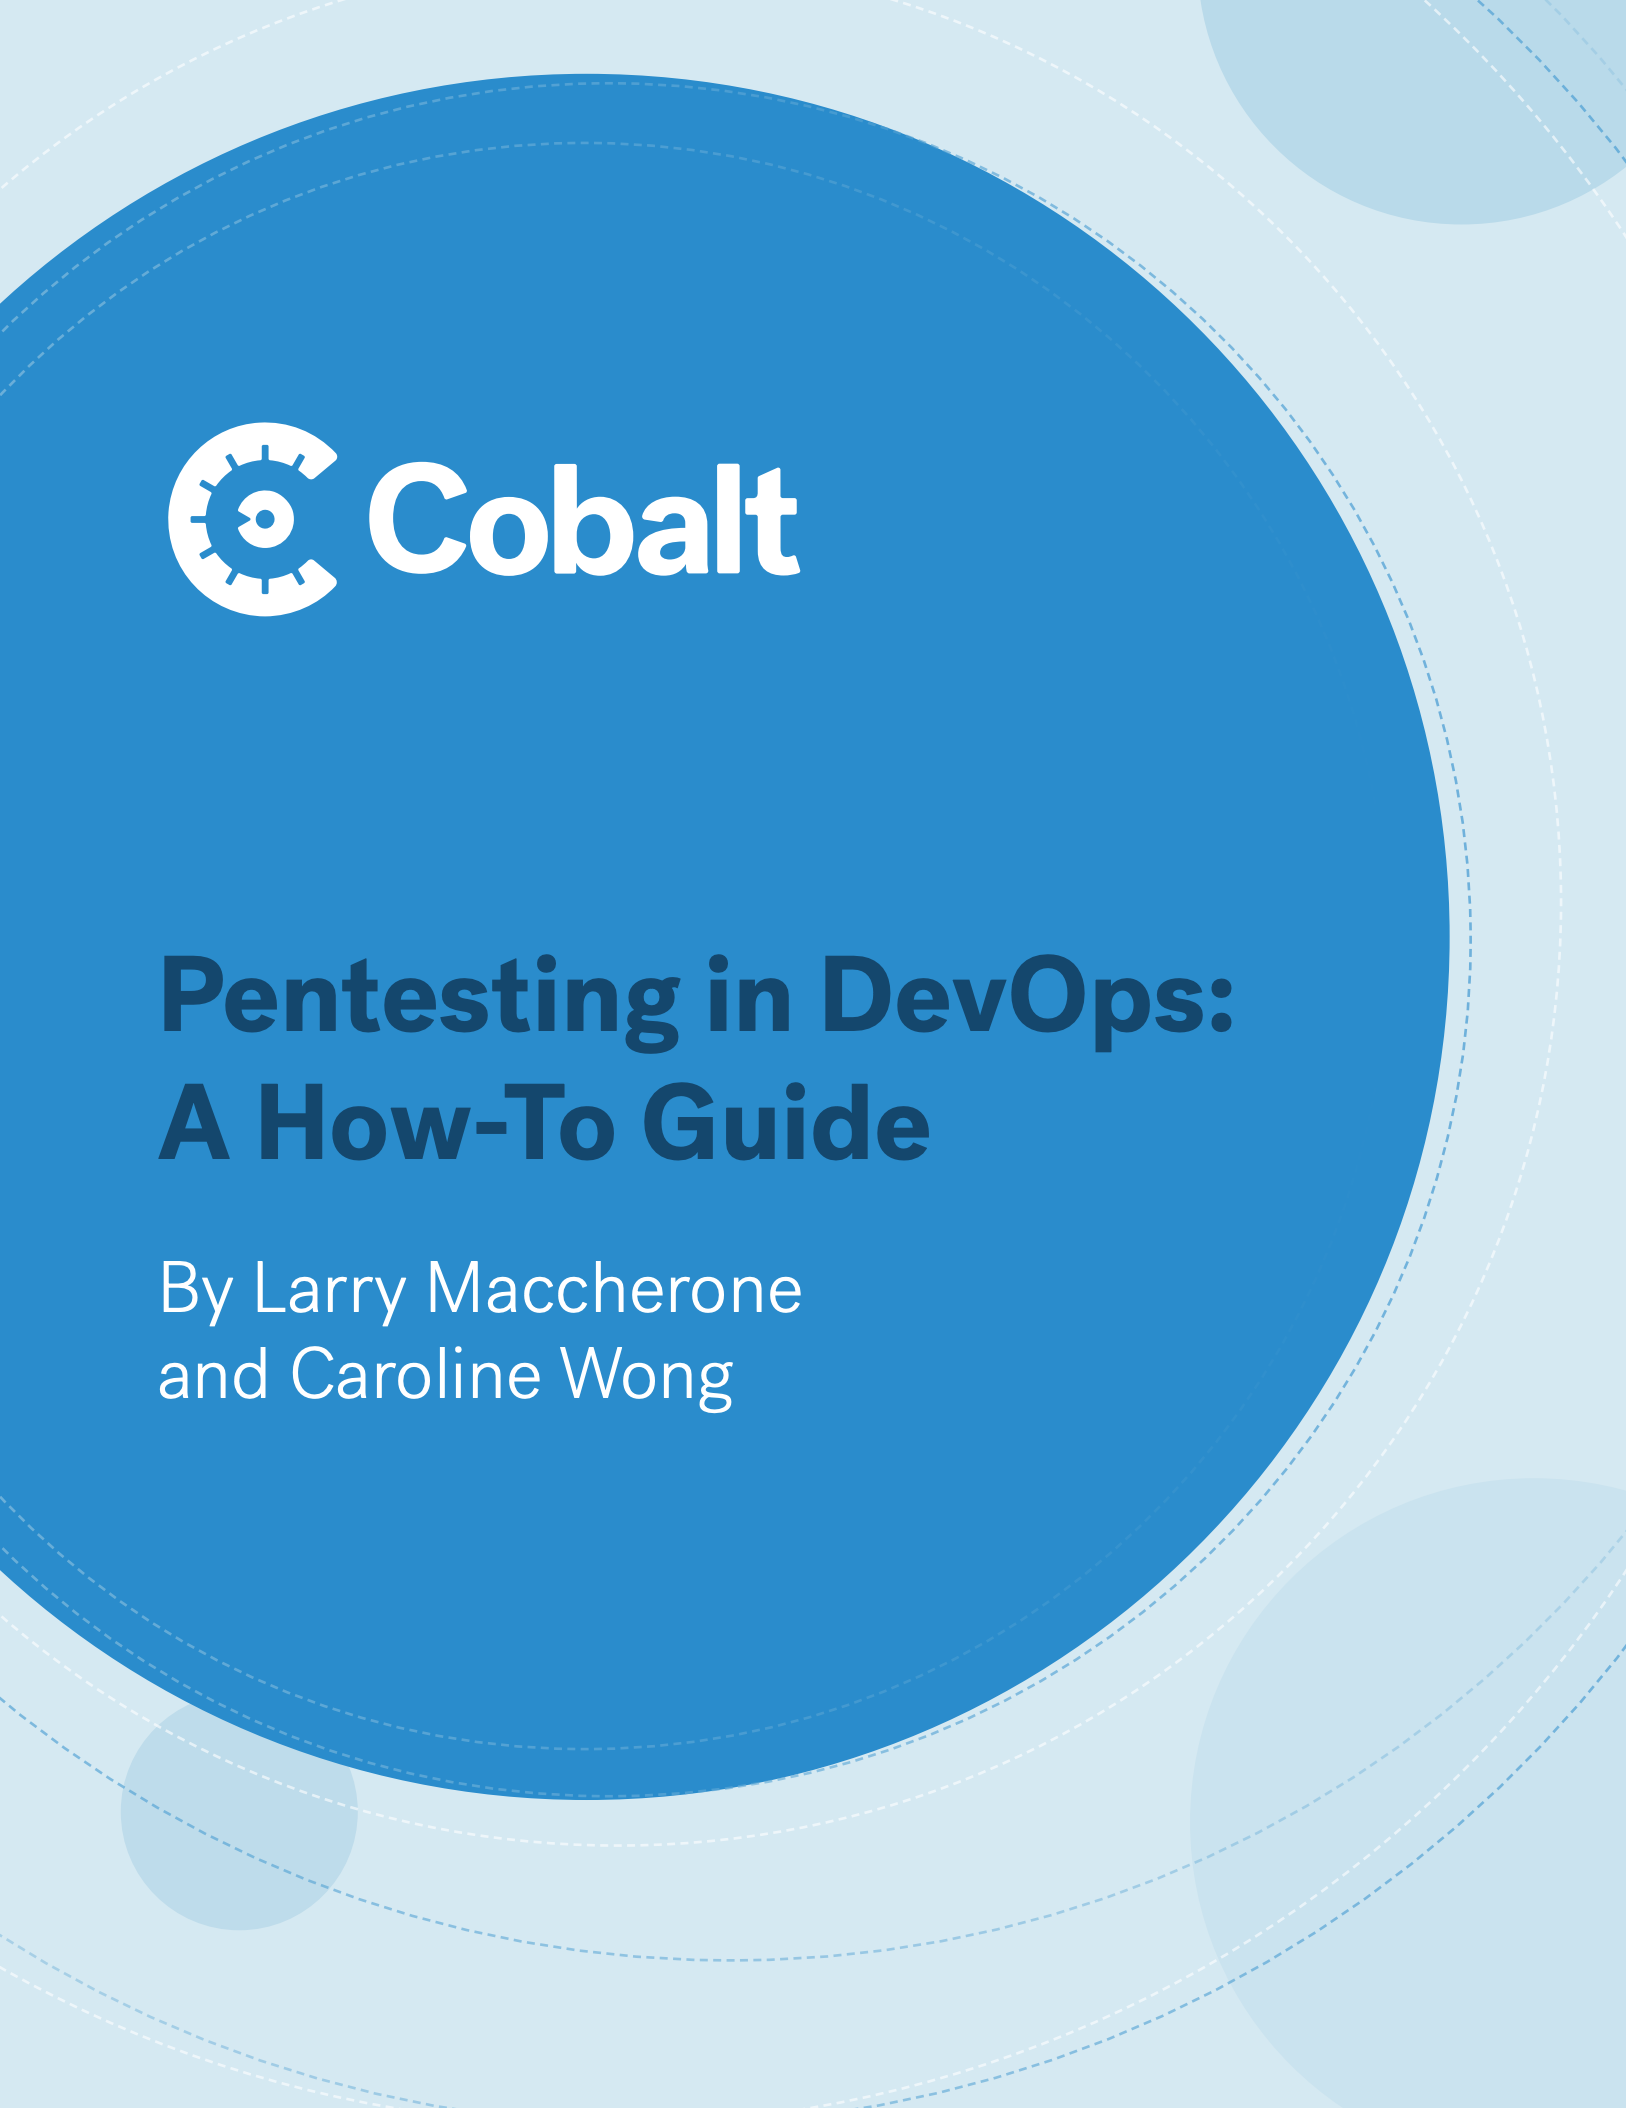 Pentesting in DevOps: A How-To Guide eBook